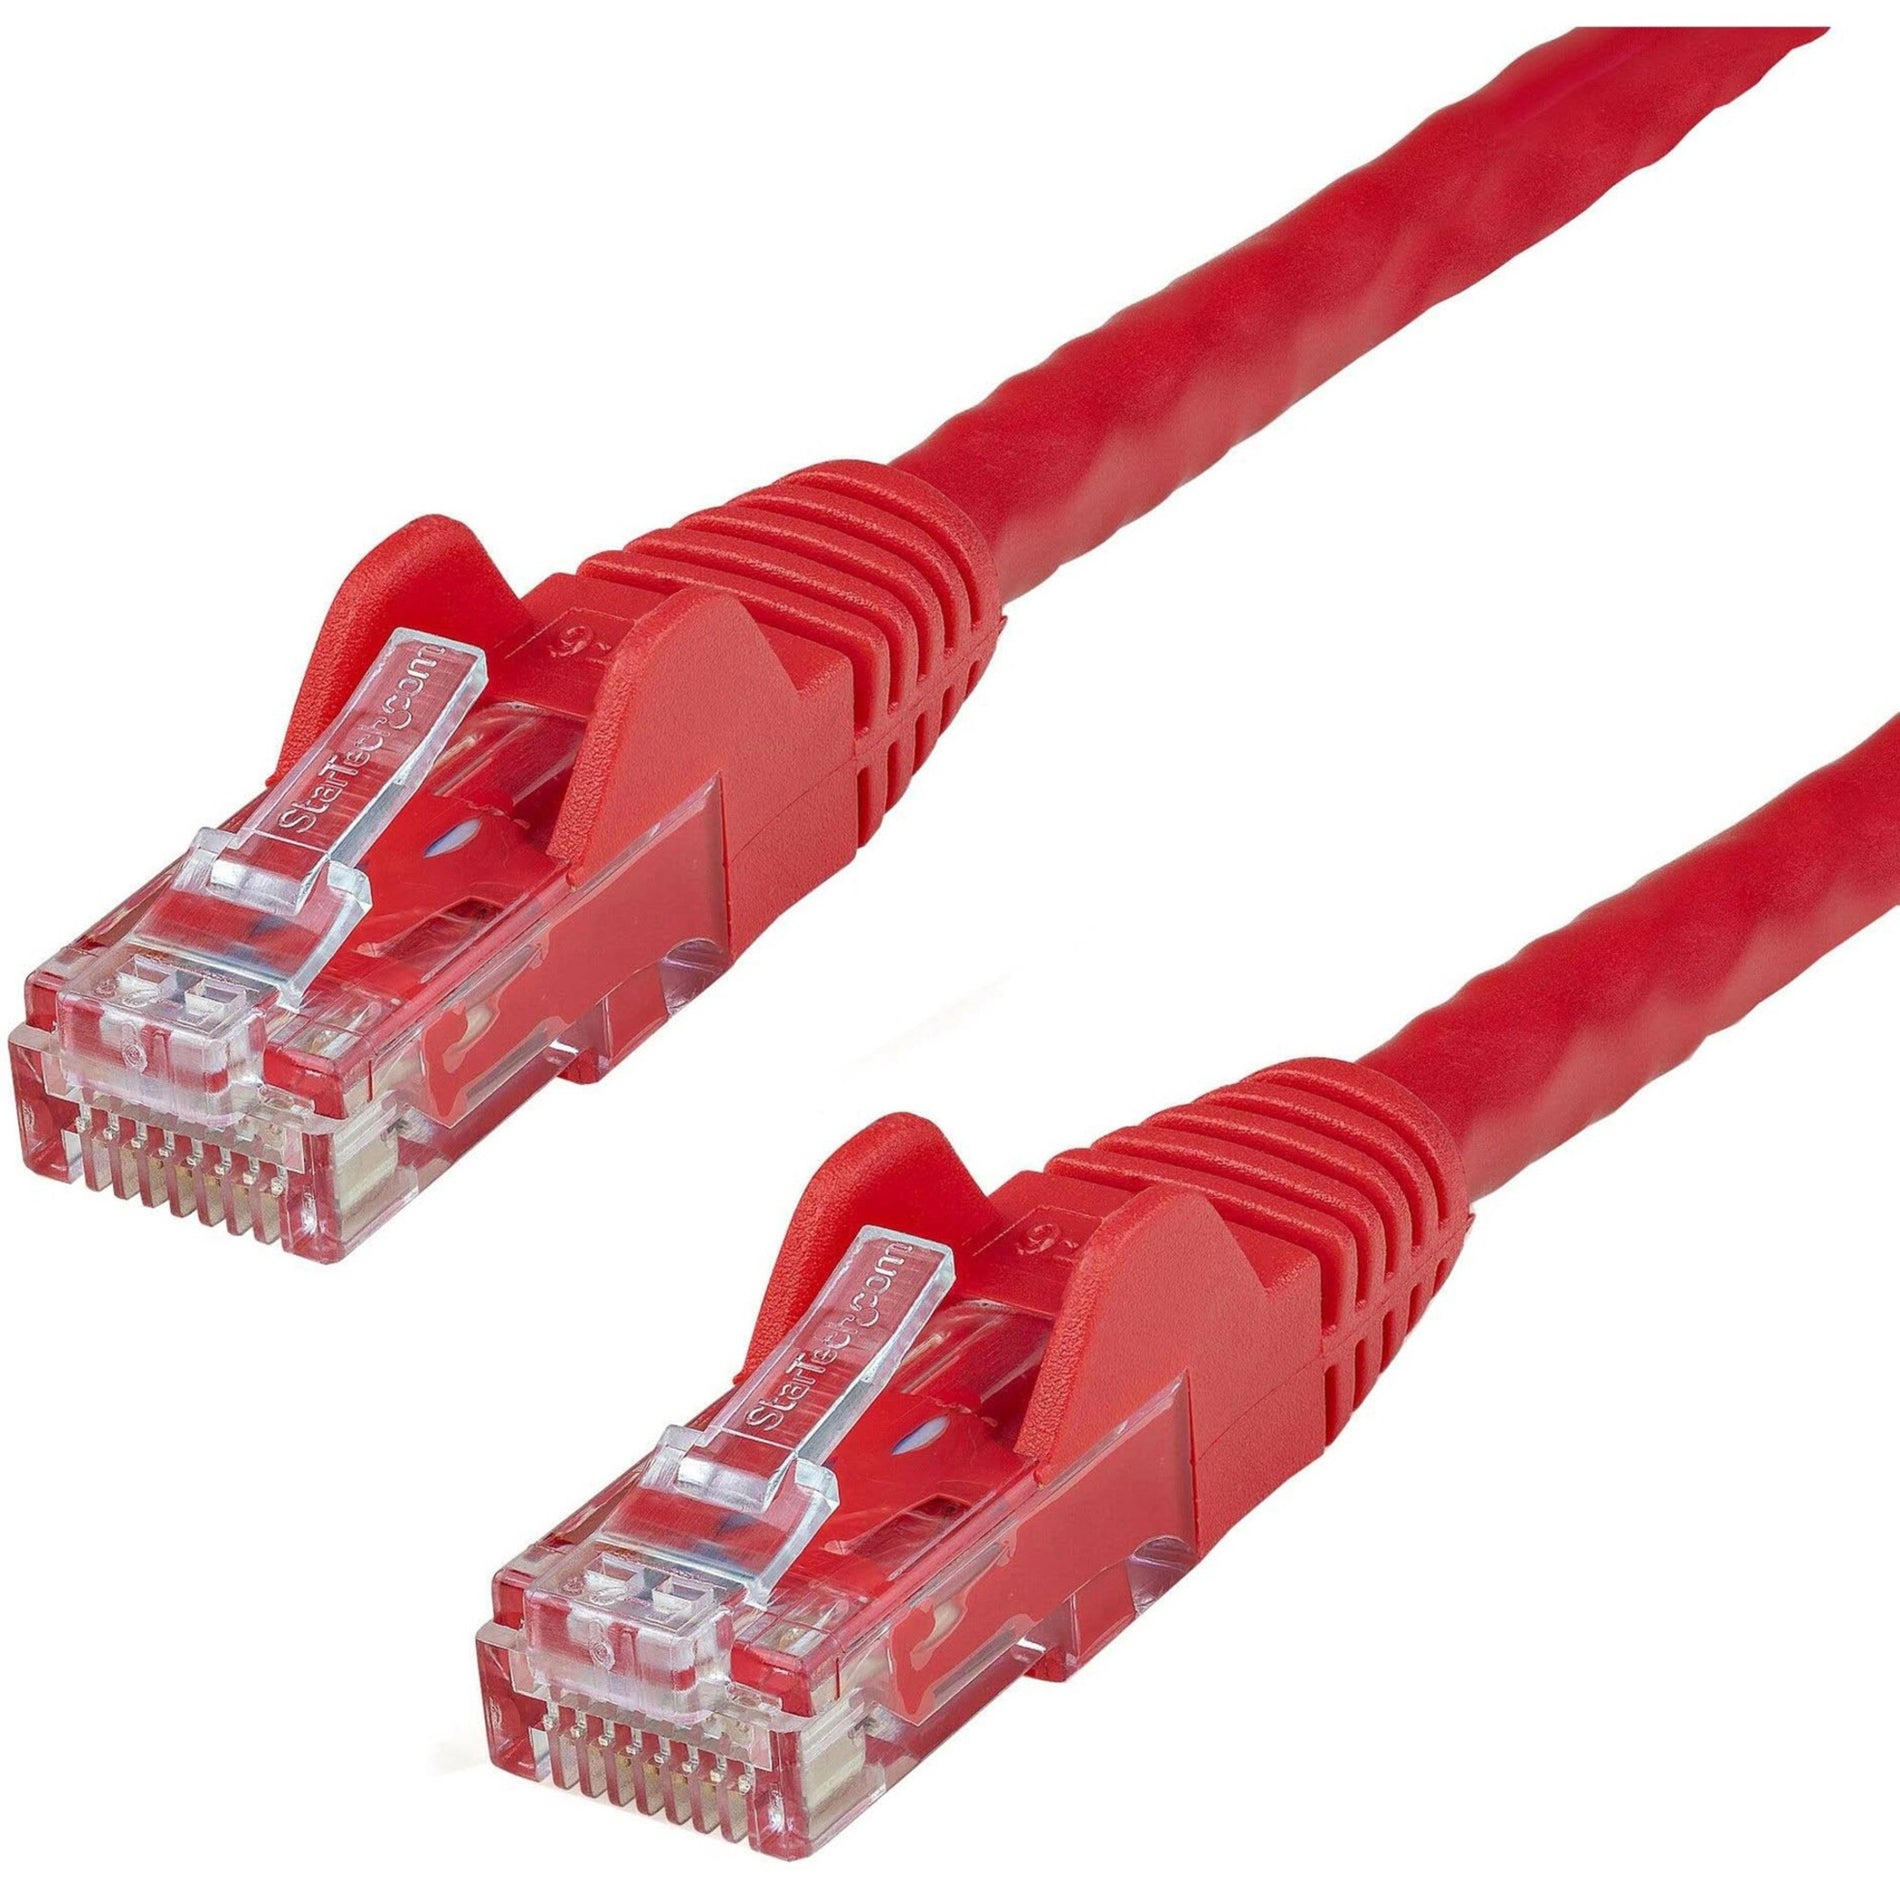 StarTech.com N6PATCH6INRD Cat.6 Patch Cable, 6in Red, Snagless RJ45 Connectors